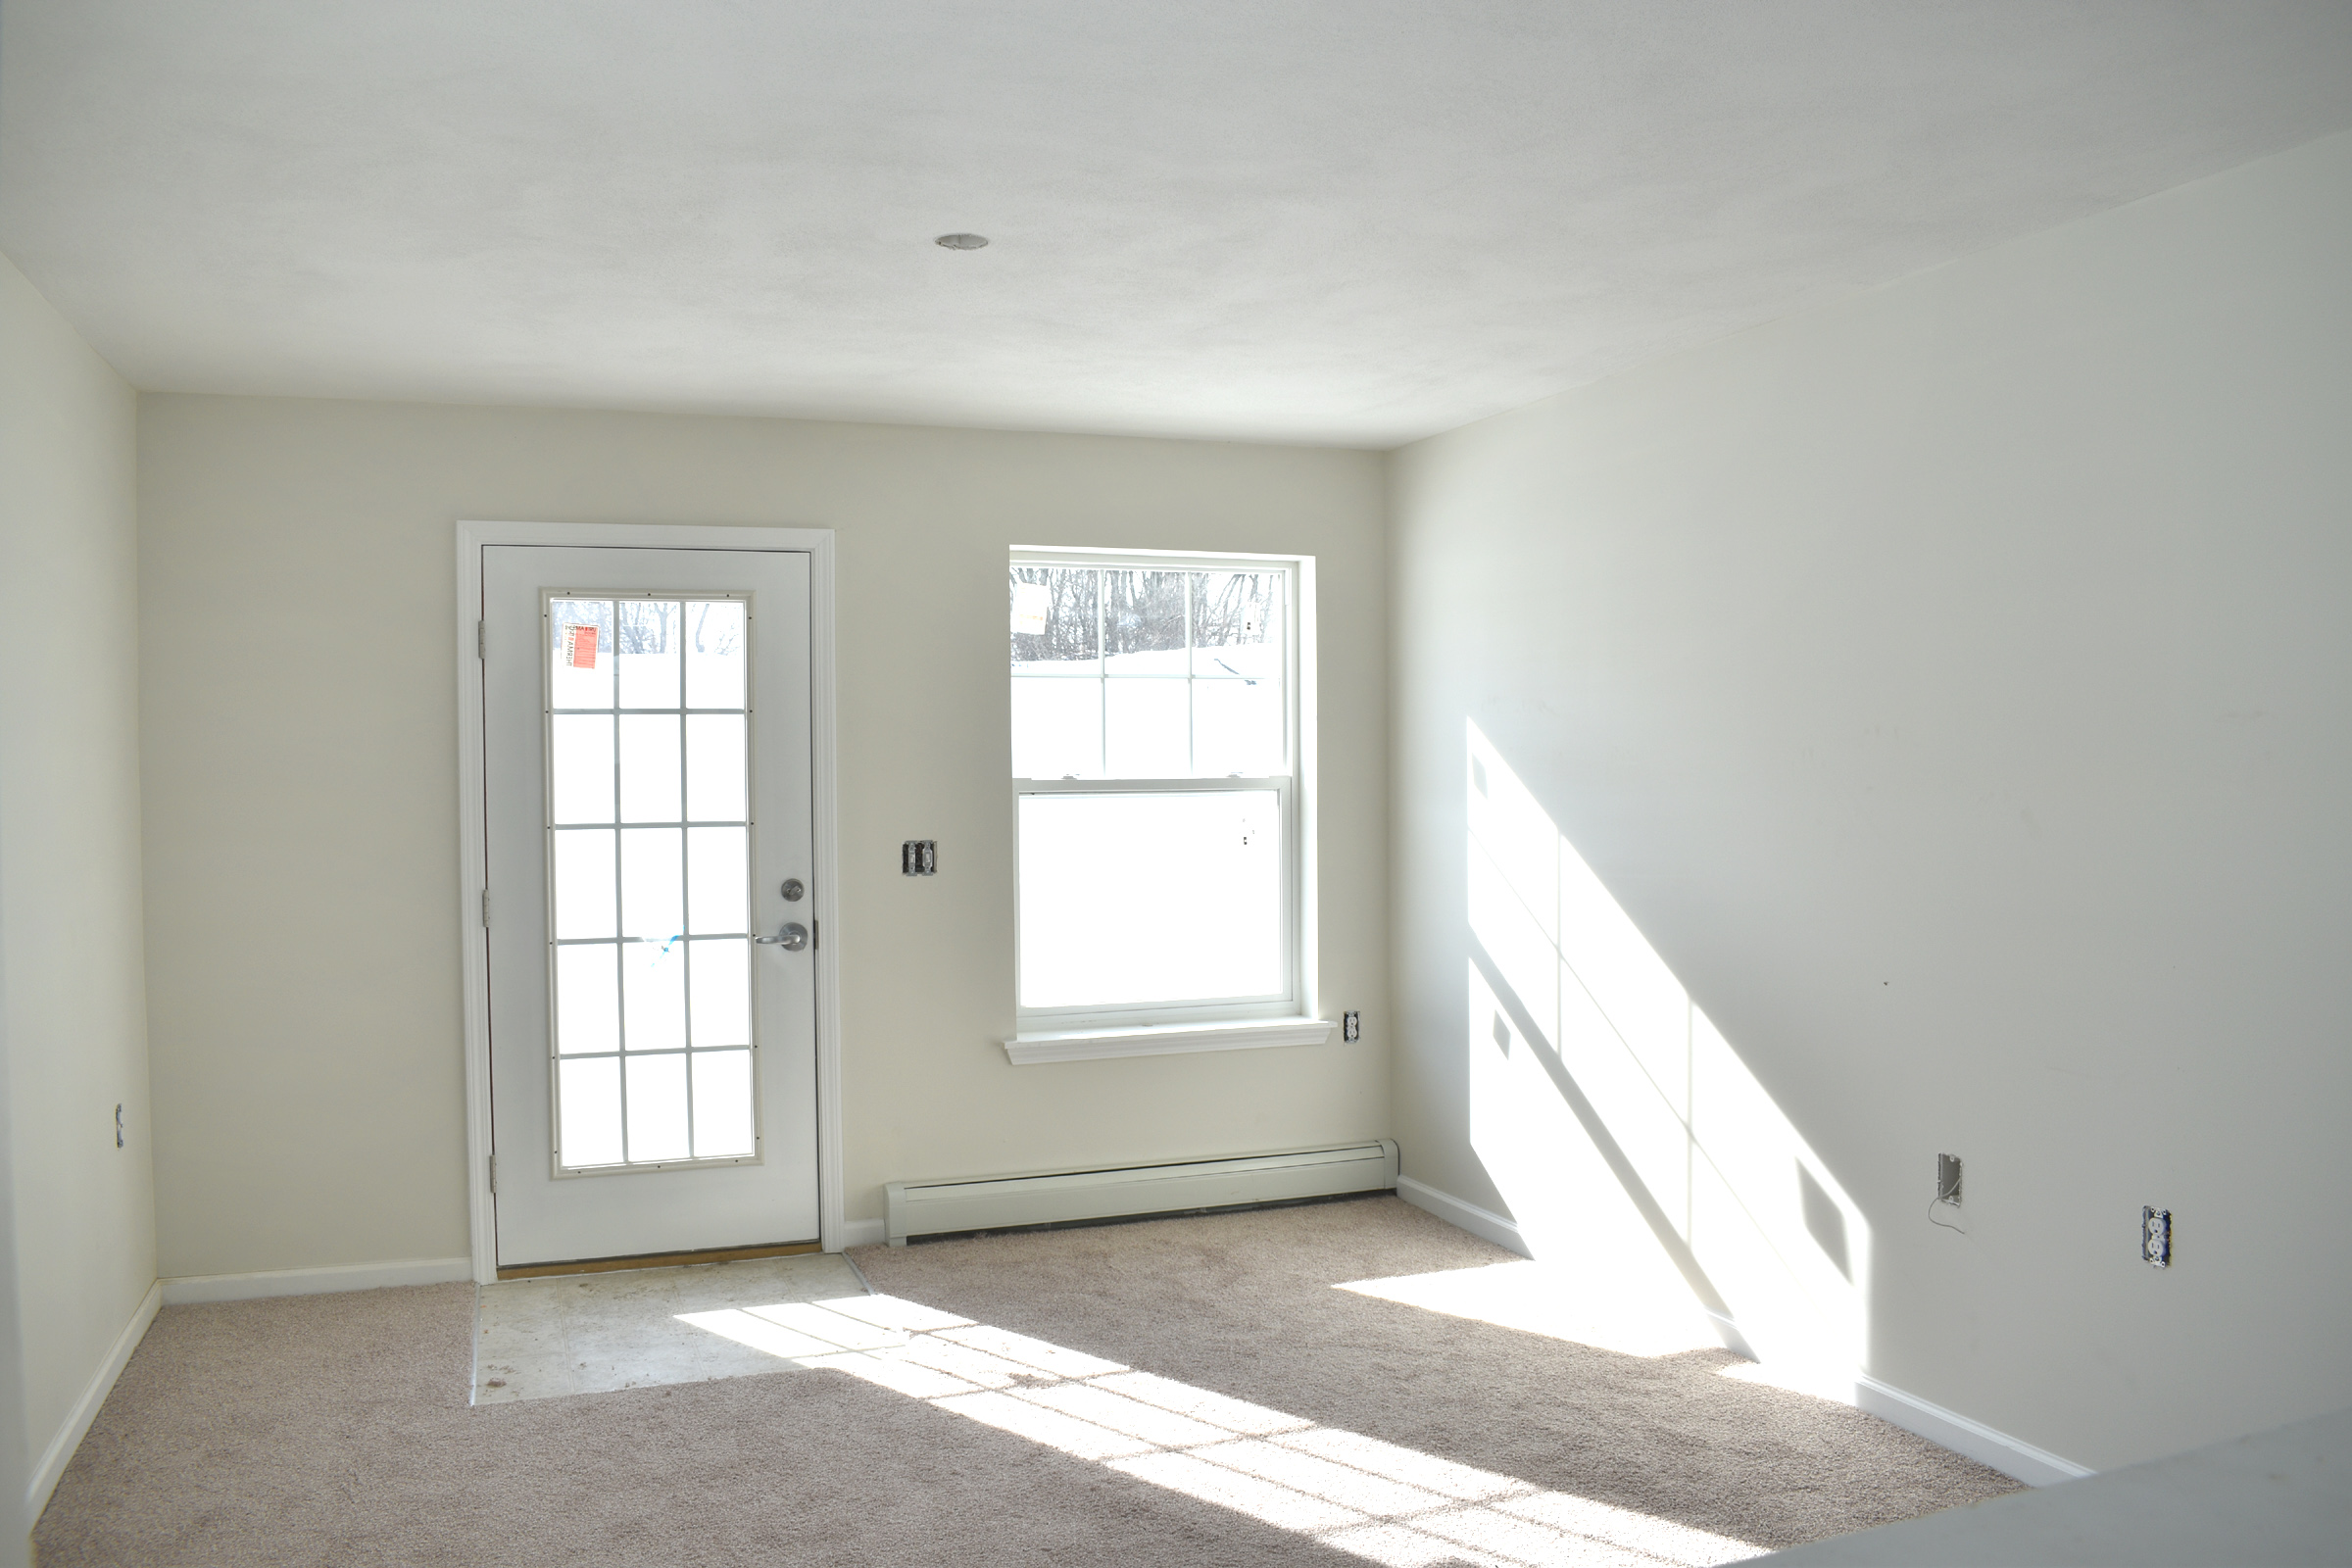 property management company client list syracuse ny living room during construction image of selkirk townhome